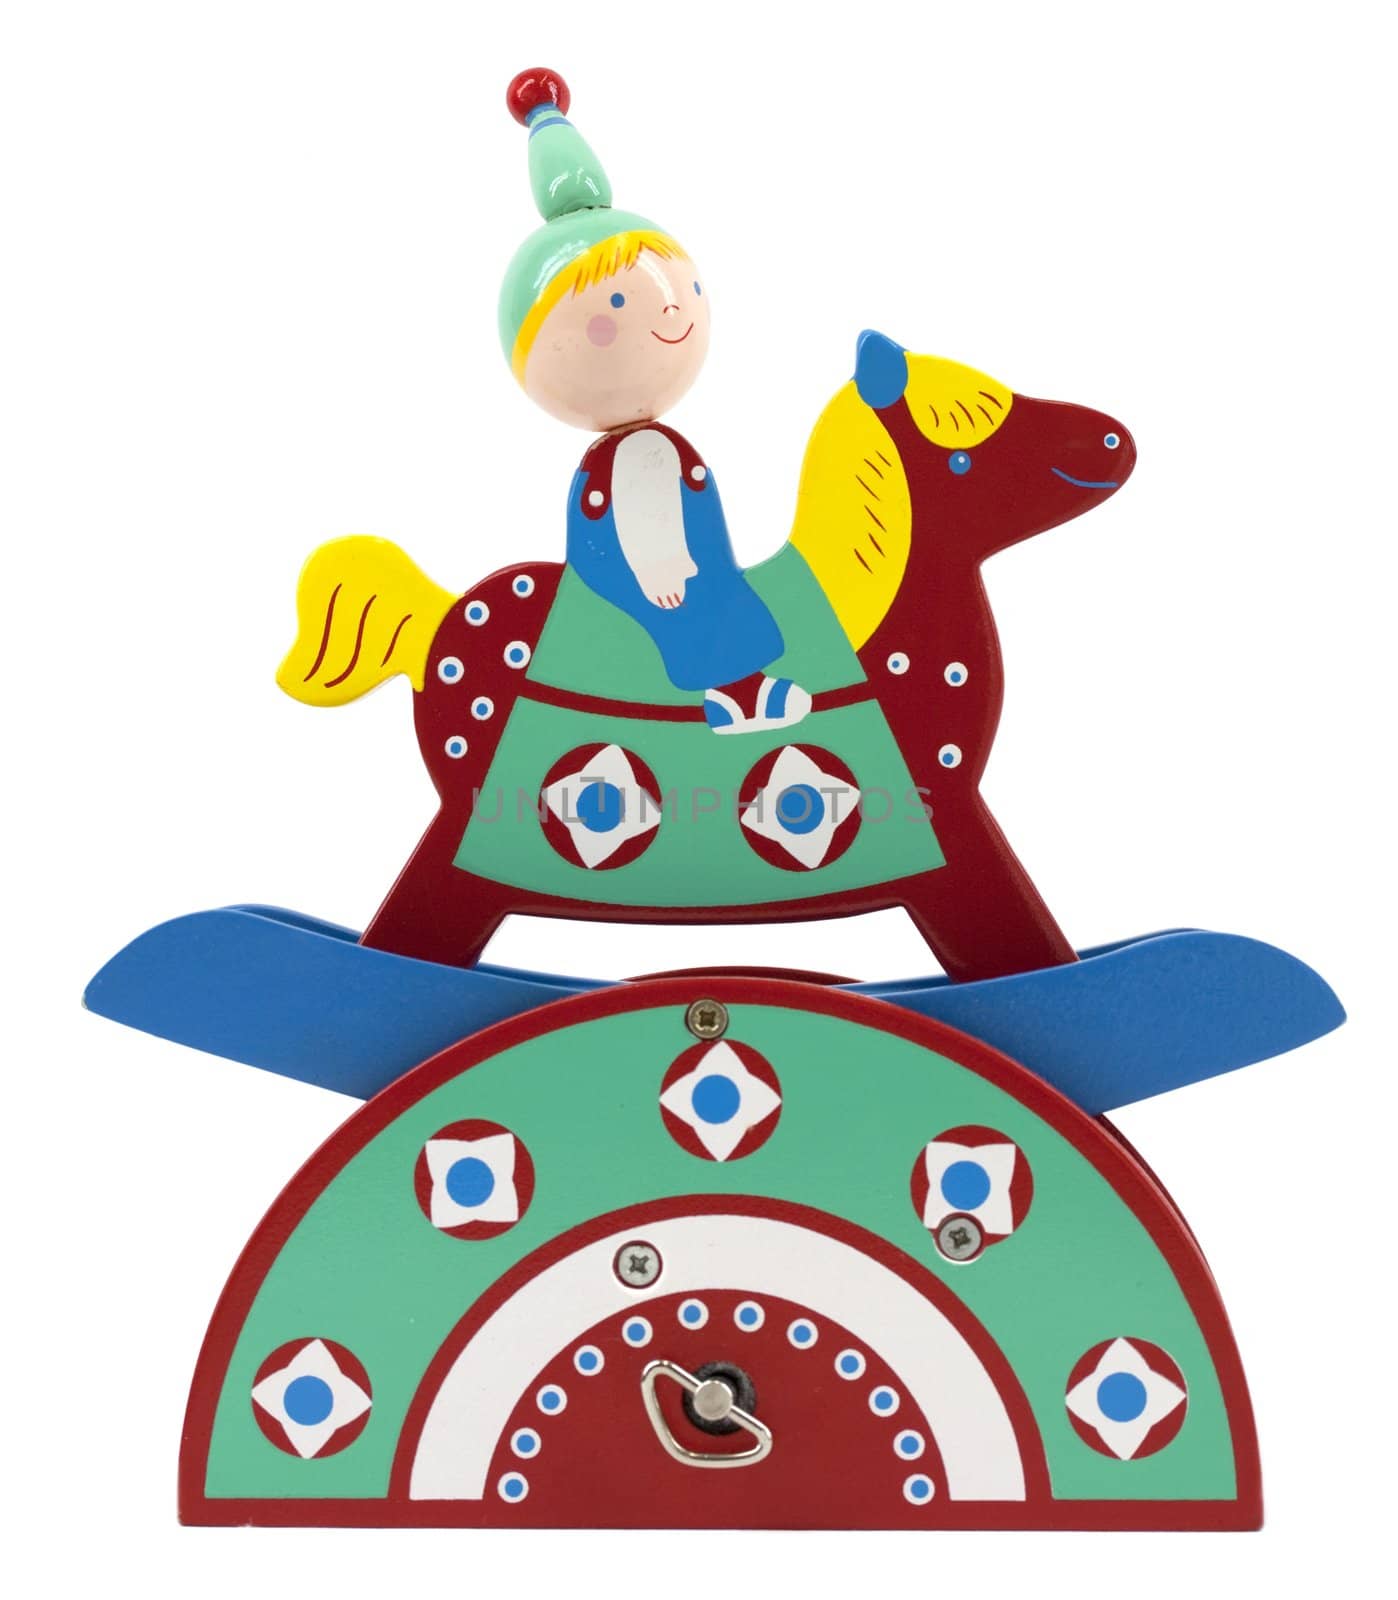 Colorful wooden music box with boy on rocking horse